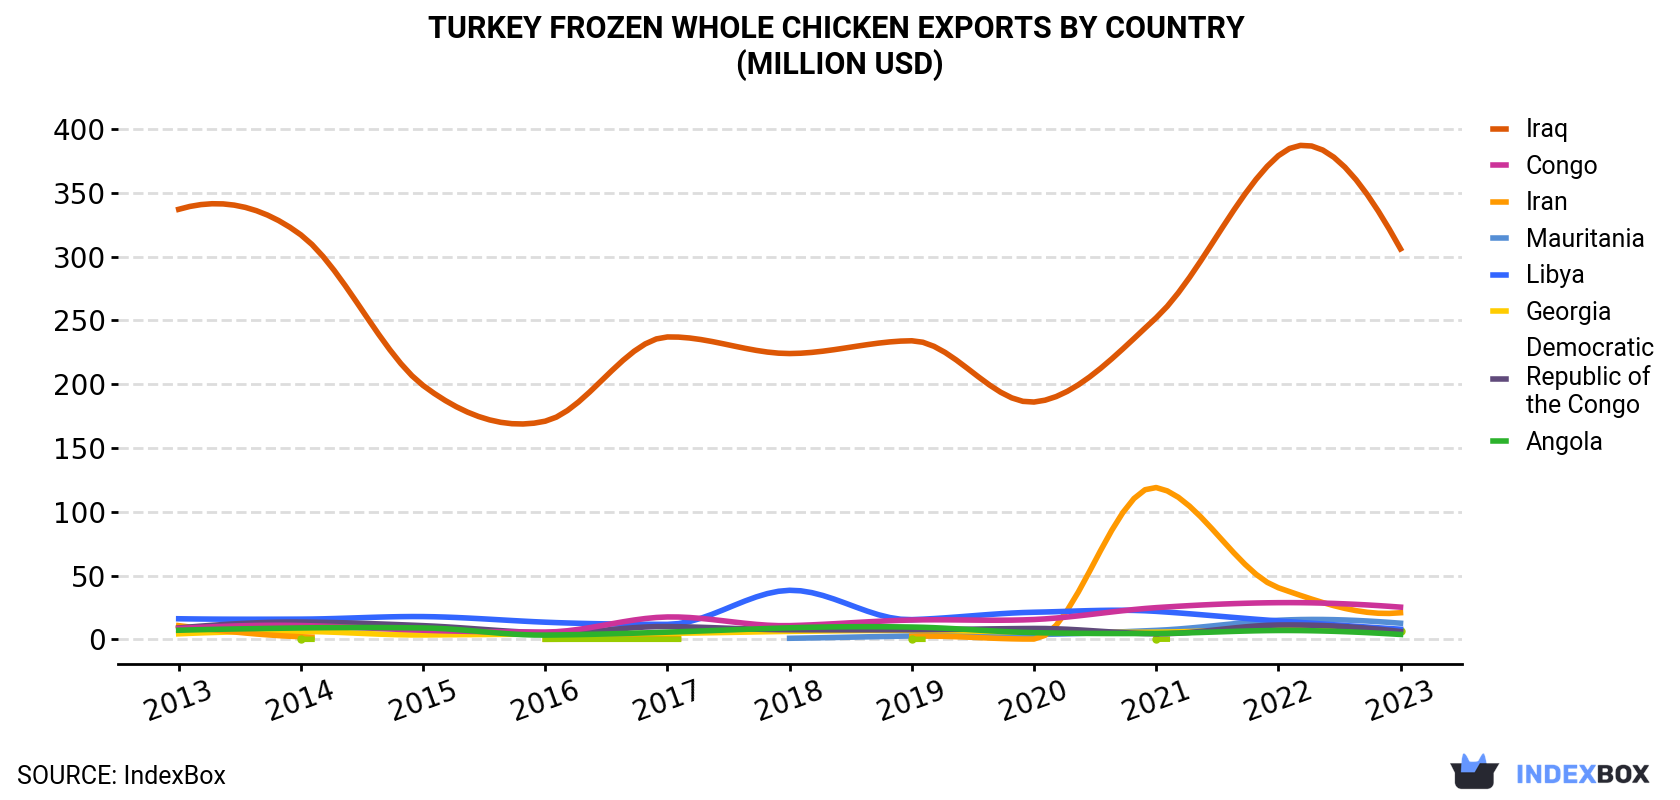 Turkey Frozen Whole Chicken Exports By Country (Million USD)